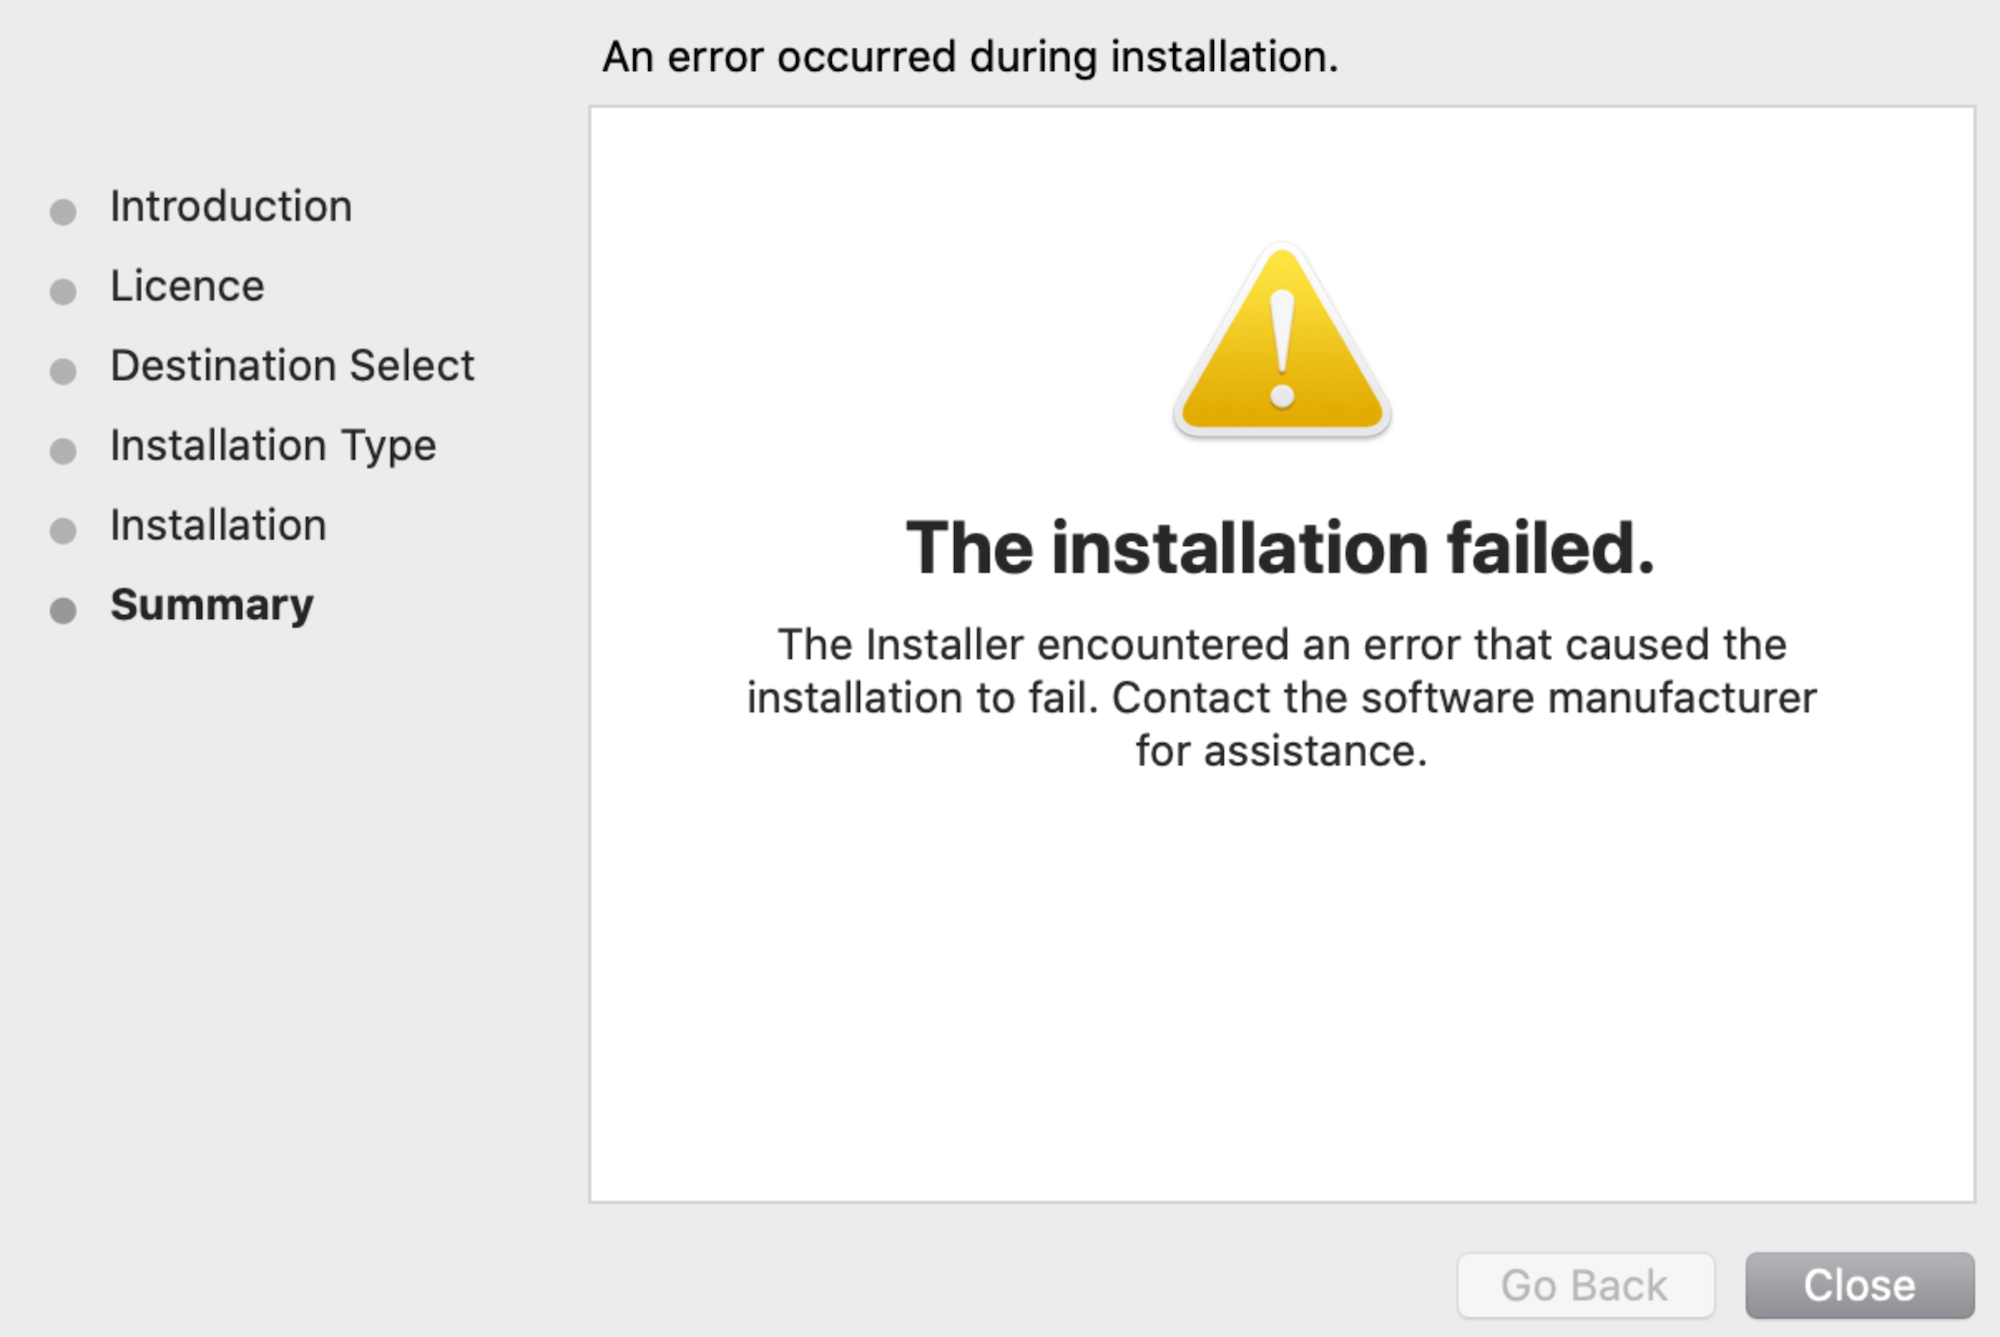 An image showing the installation failed error message